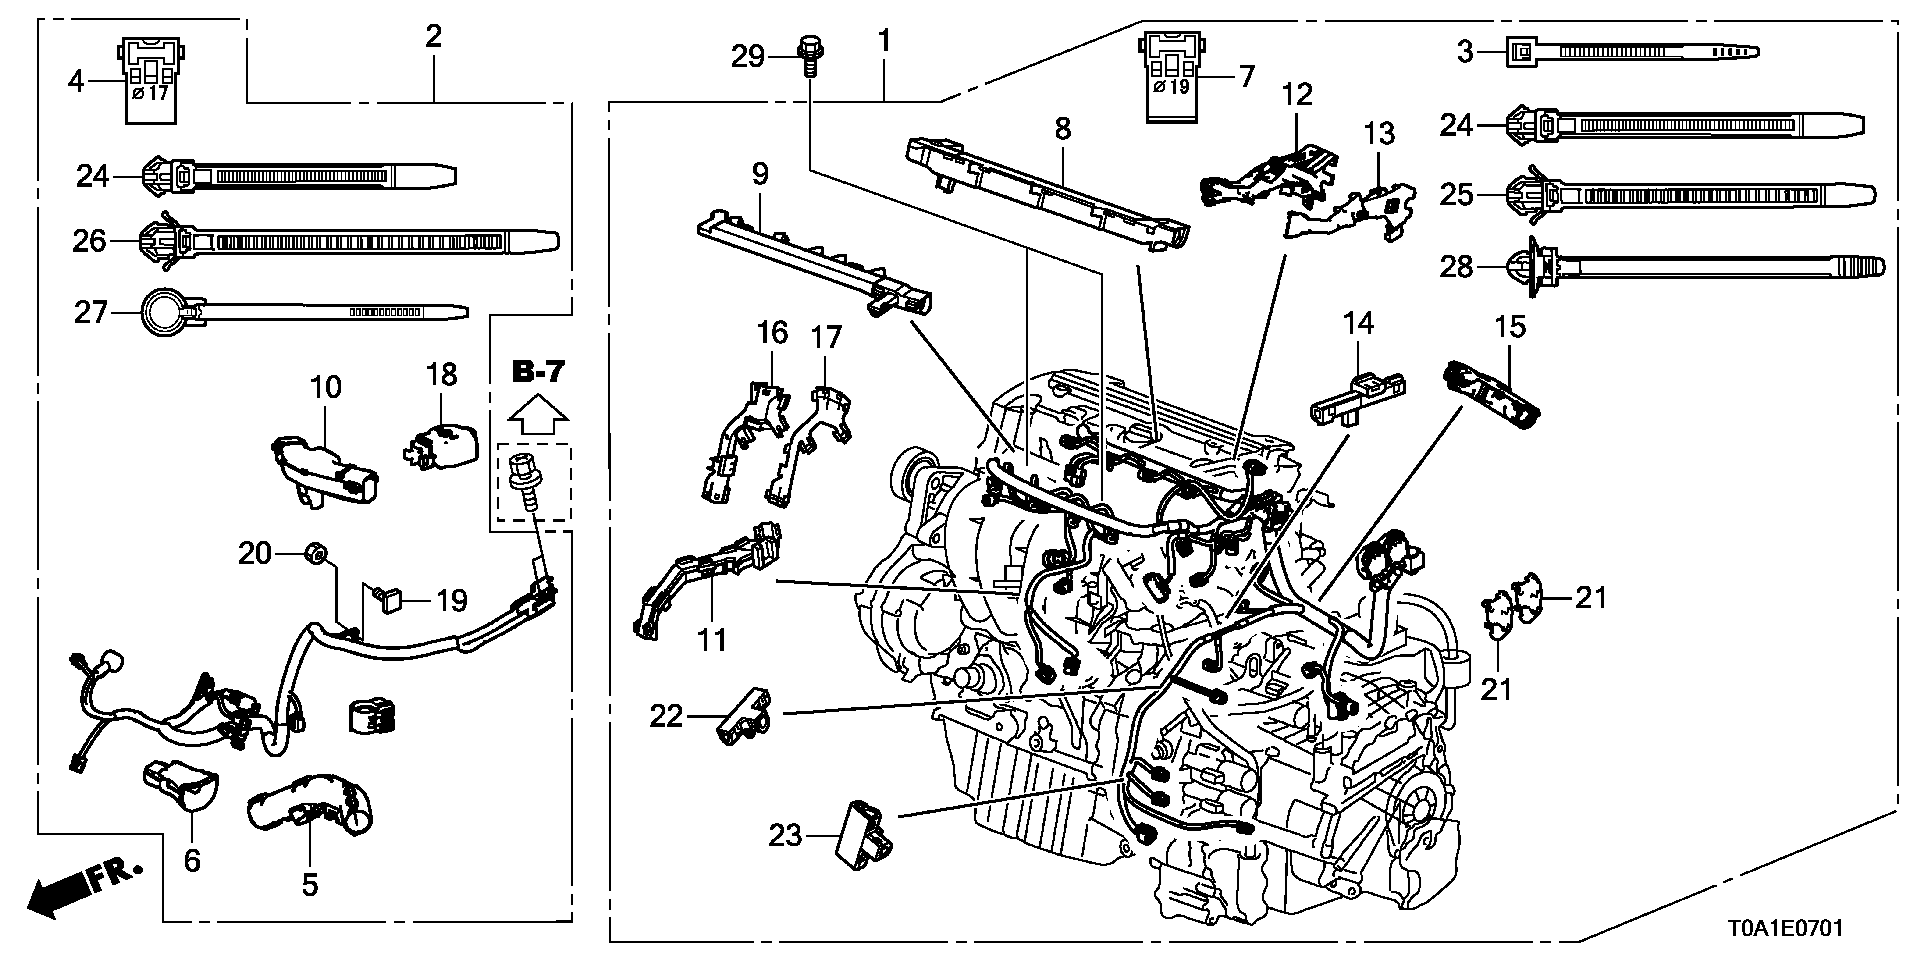 ENGINE WIRE HARNESS(2.4L)